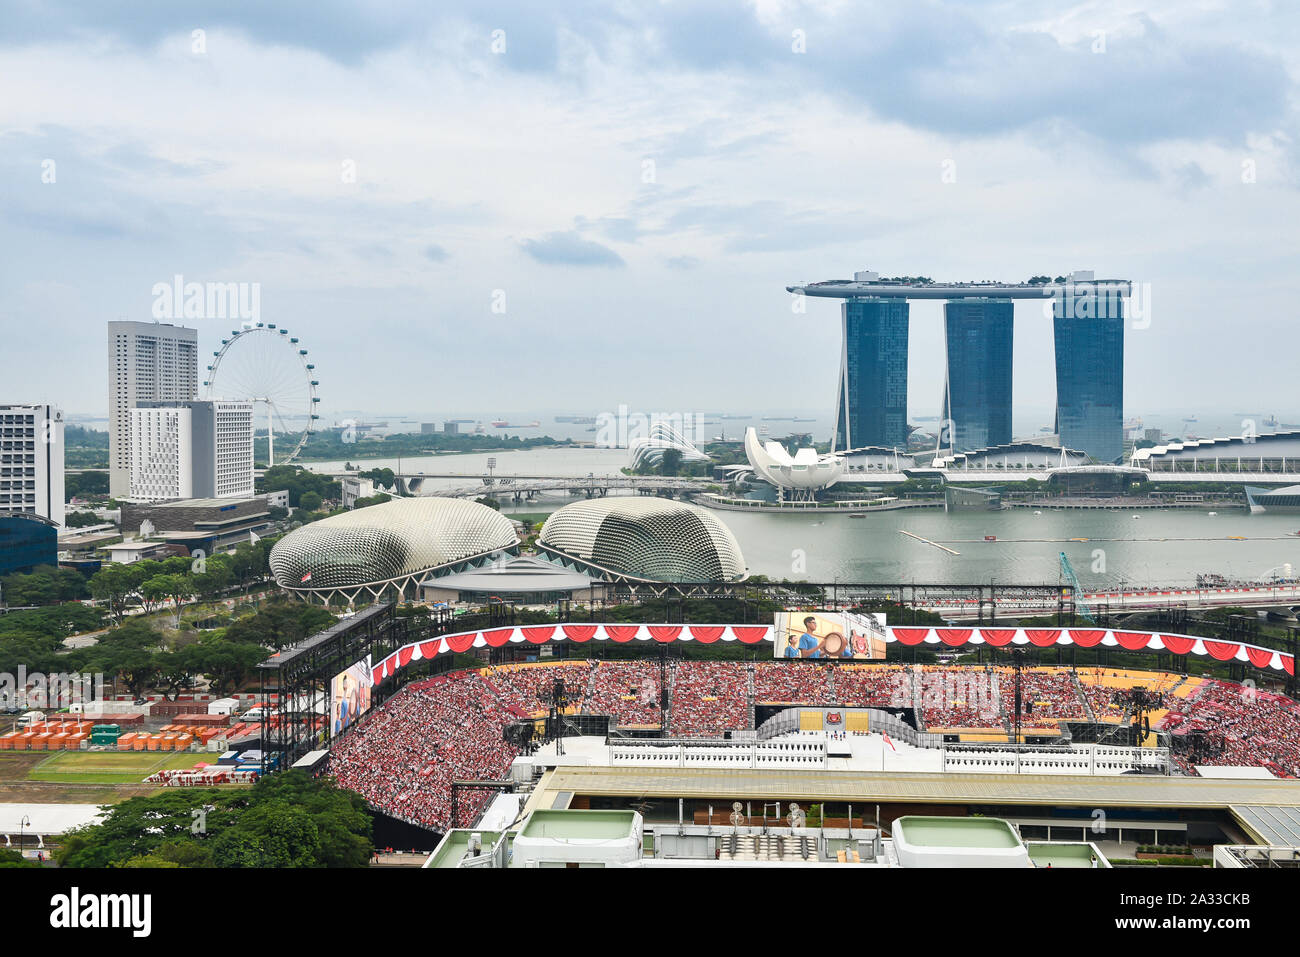 Singapore, 04 July 2015: Singapore city view of Marina Bay and skyscrapers during National Day Parade rehearsal. Stock Photo